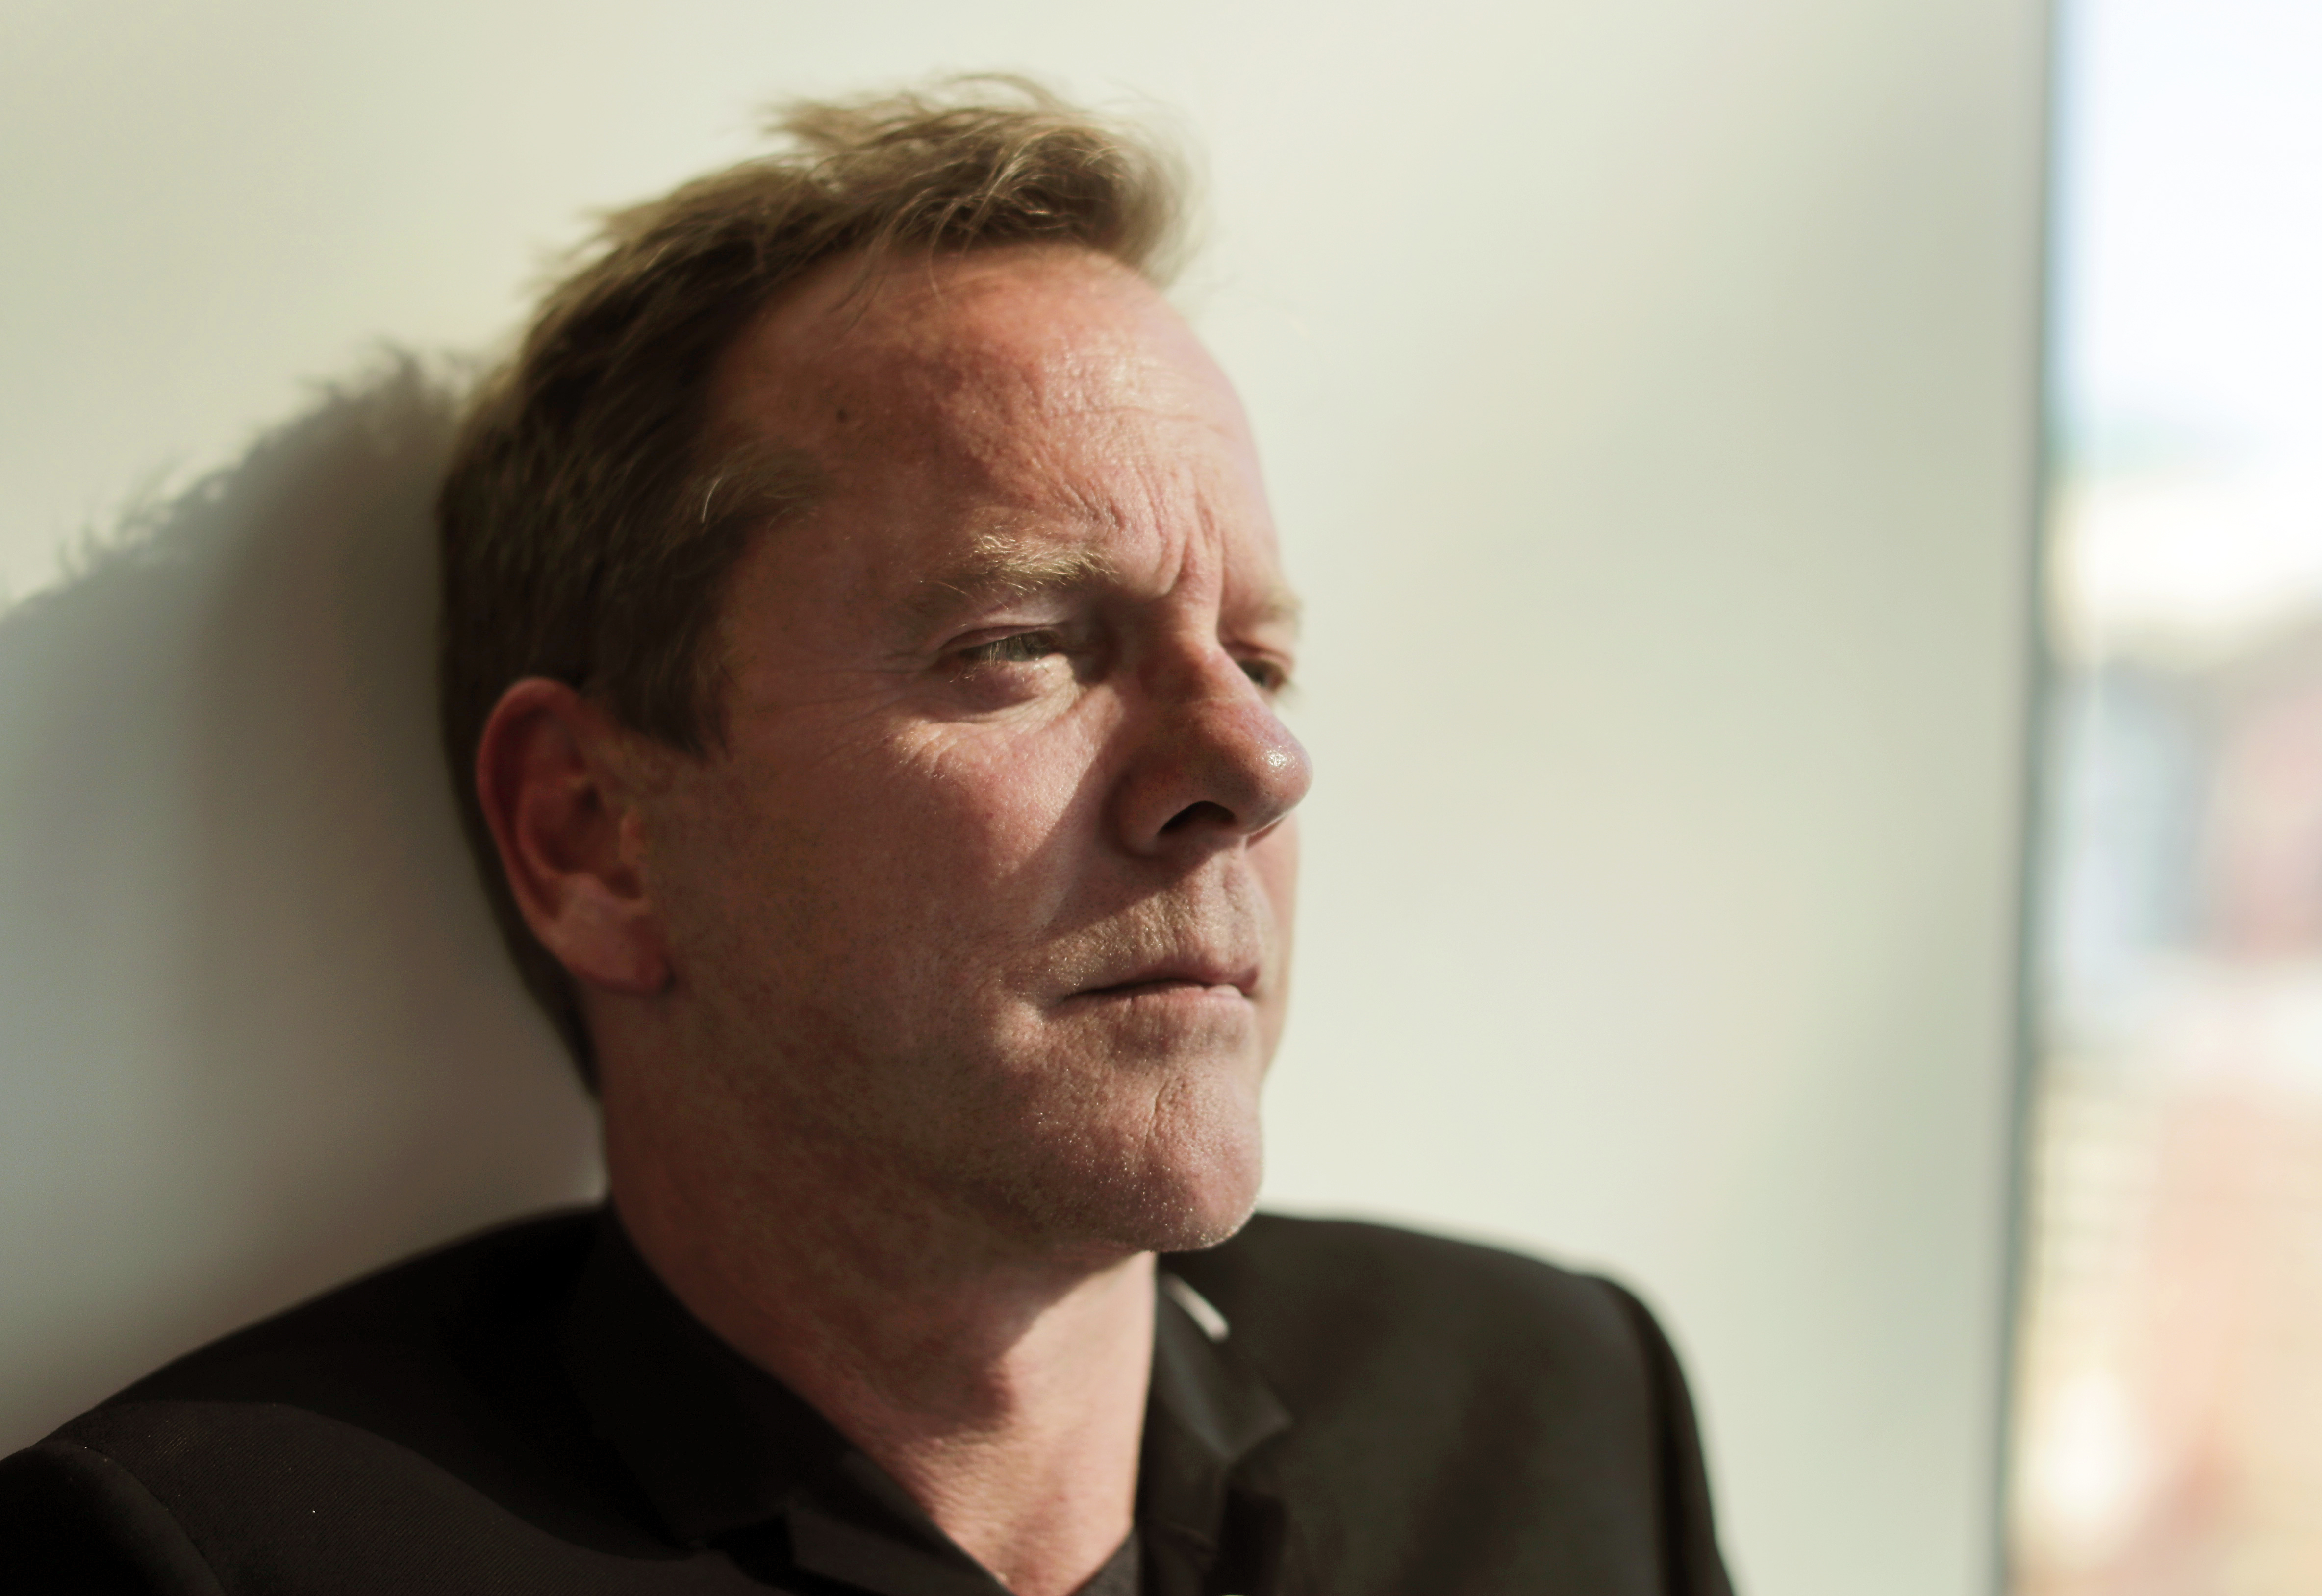 Kiefer Sutherland performs at DC’s City Winery, reflects on Jack Bauer in ’24’